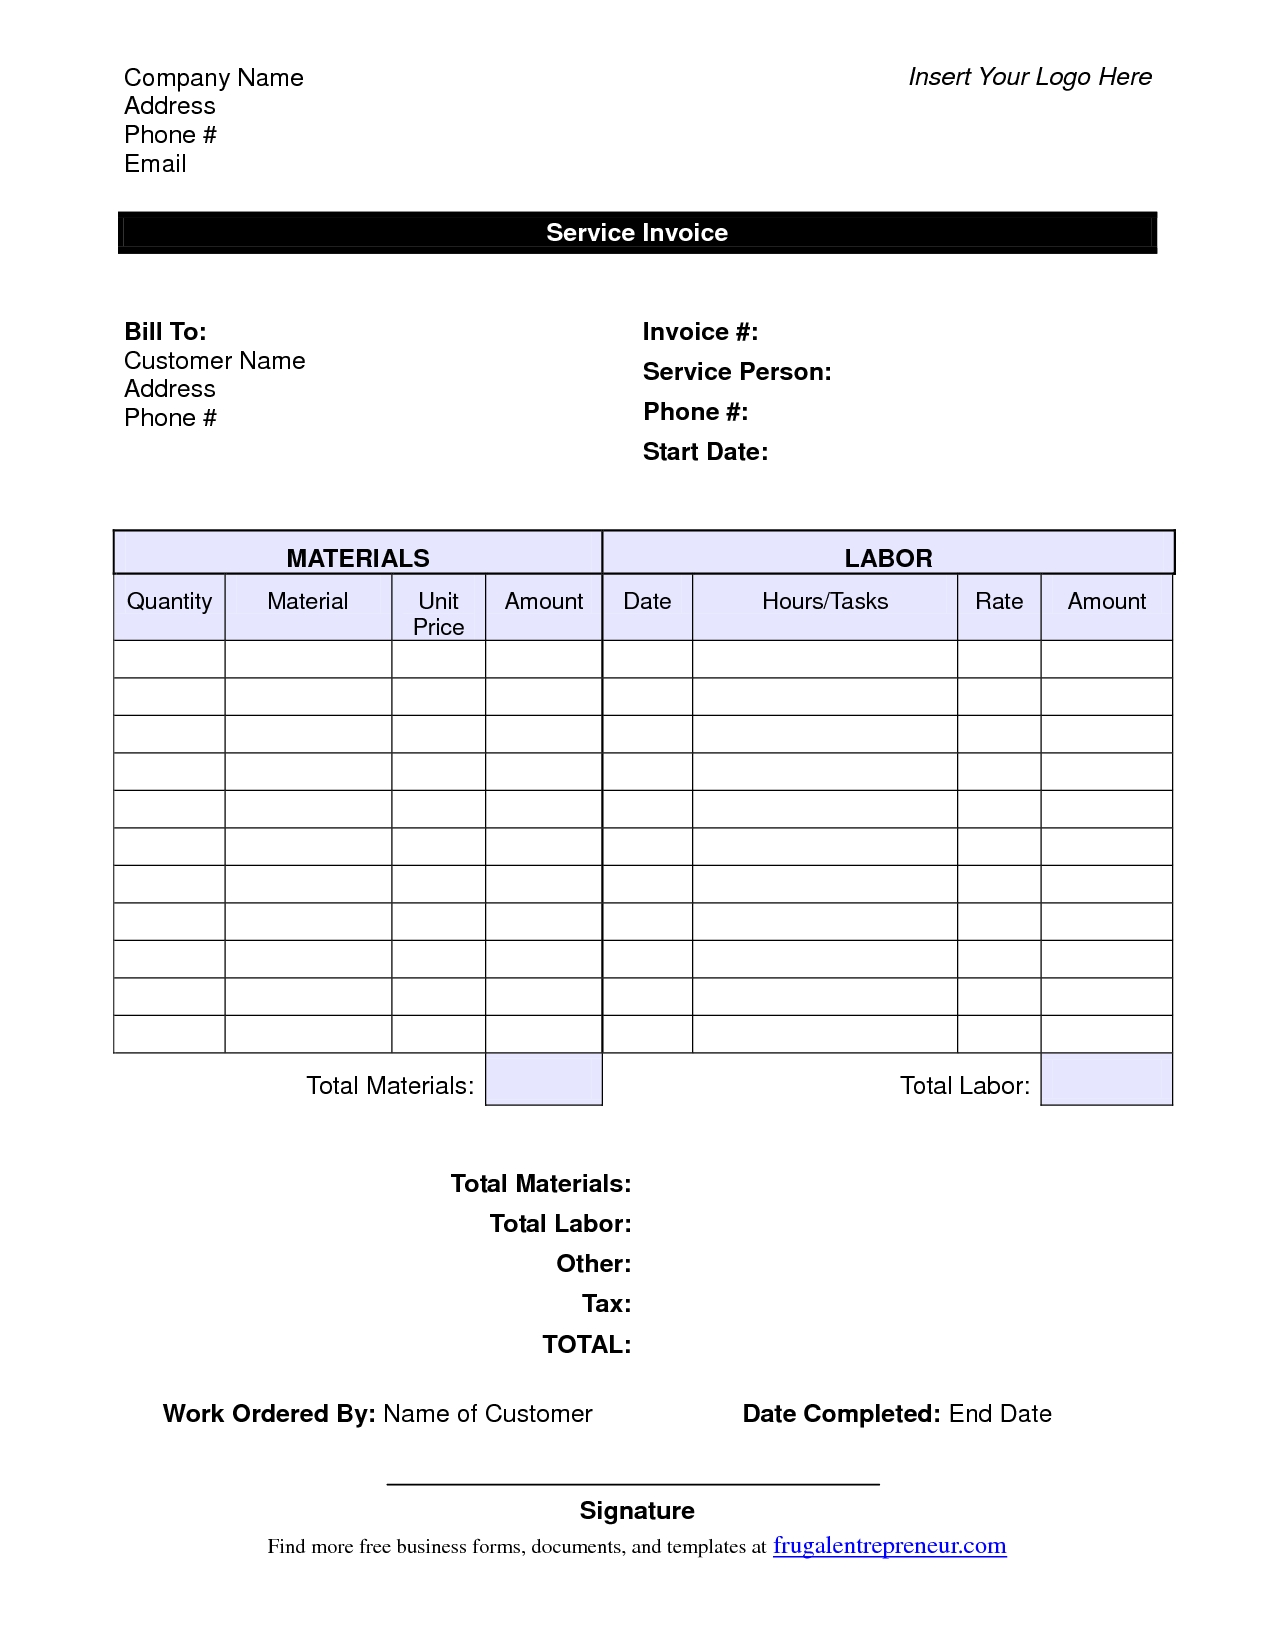 customer invoice template excel labor invoice template free free business template 1275 X 1650